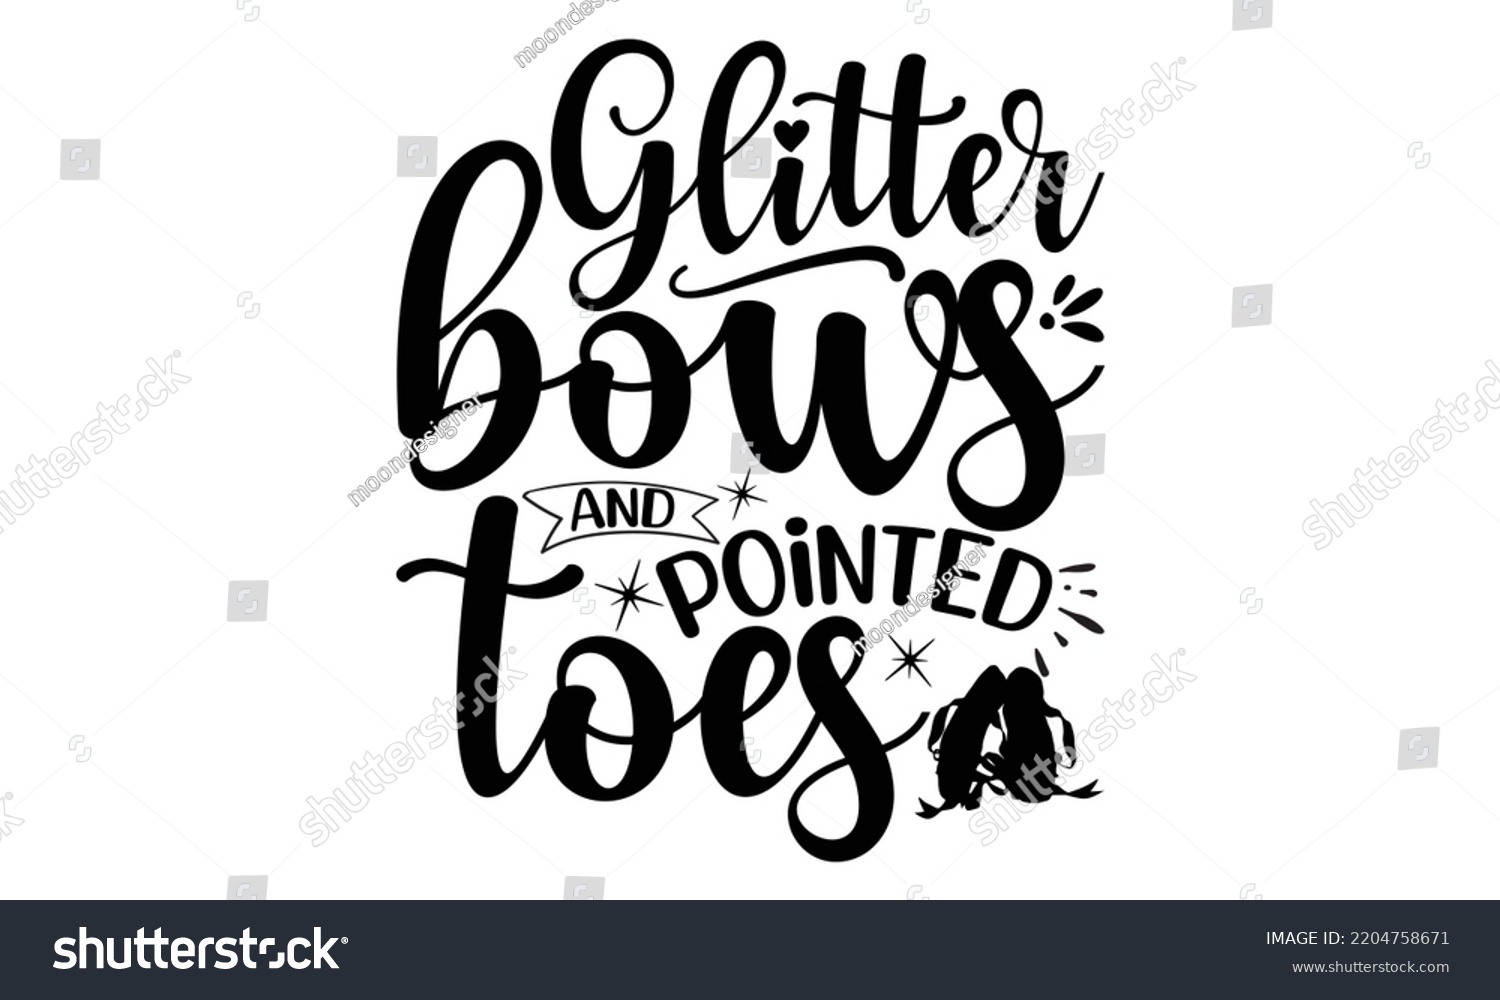 SVG of Glitter bows and pointed toes - Ballet svg t shirt design, ballet SVG Cut Files, Girl Ballet Design, Hand drawn lettering phrase and vector sign, EPS 10 svg